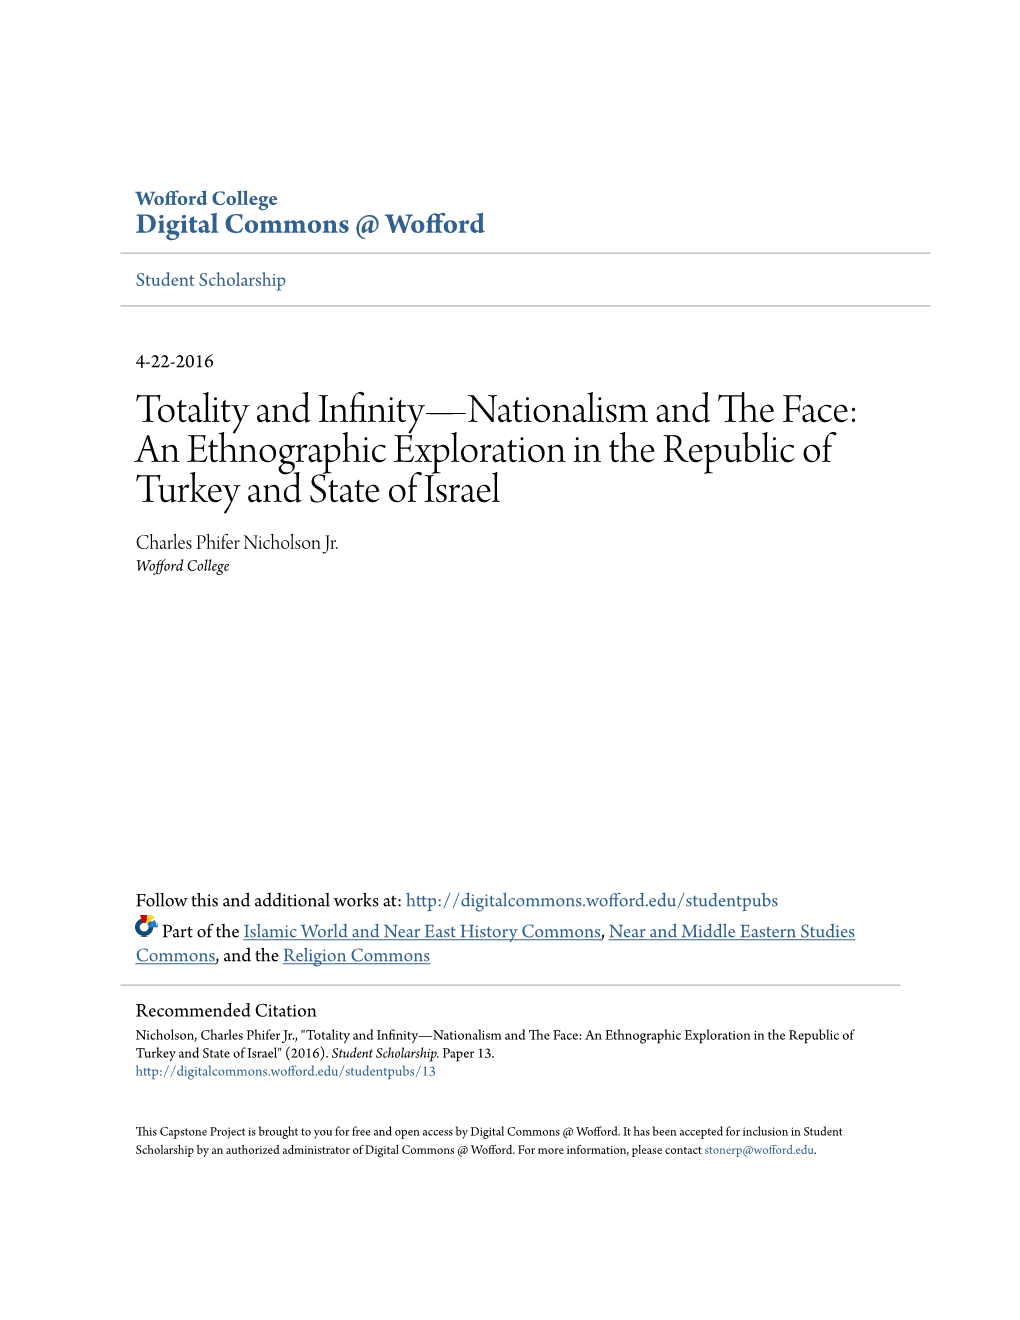 Totality and Infinity—Nationalism and the Face